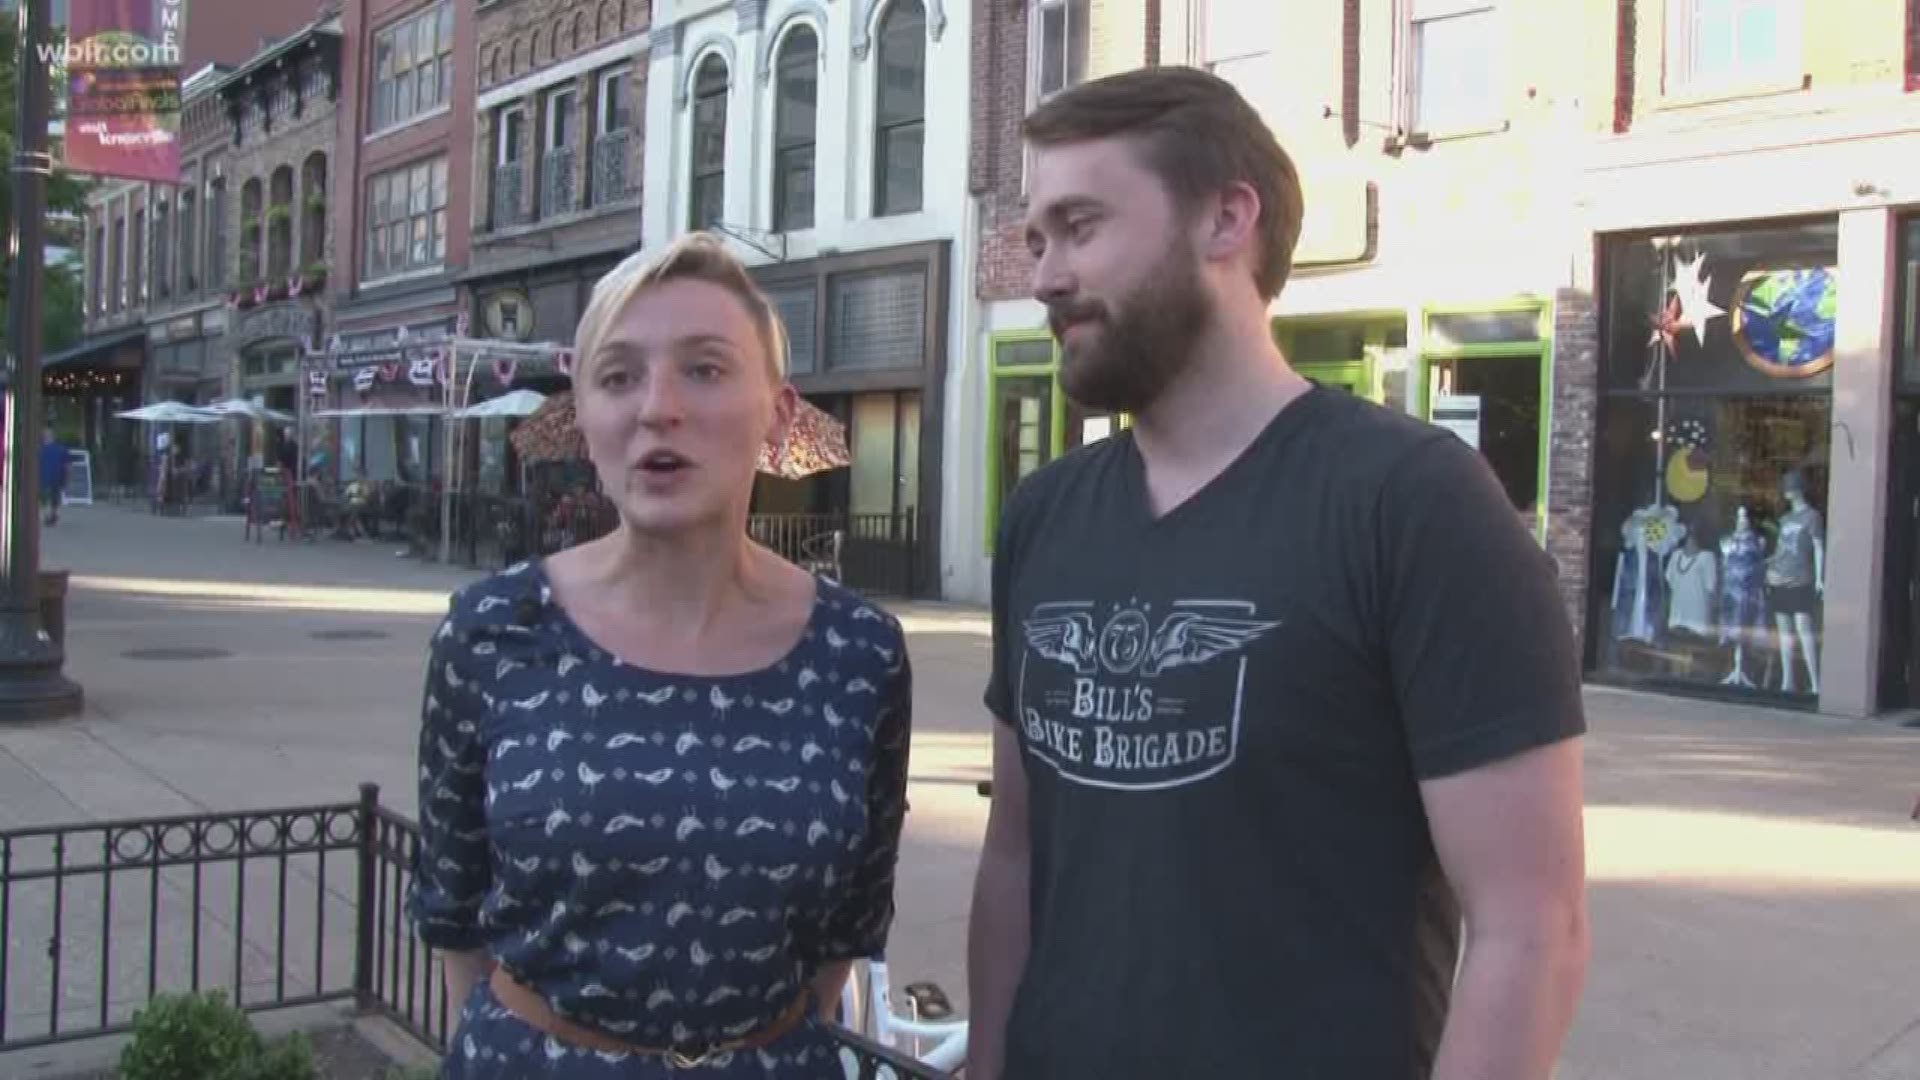 Knoxville hosted more East Tennessee visitors Tuesday. We spoke to a Minnesota couple debating on what Tennessee city they'd like to move to.